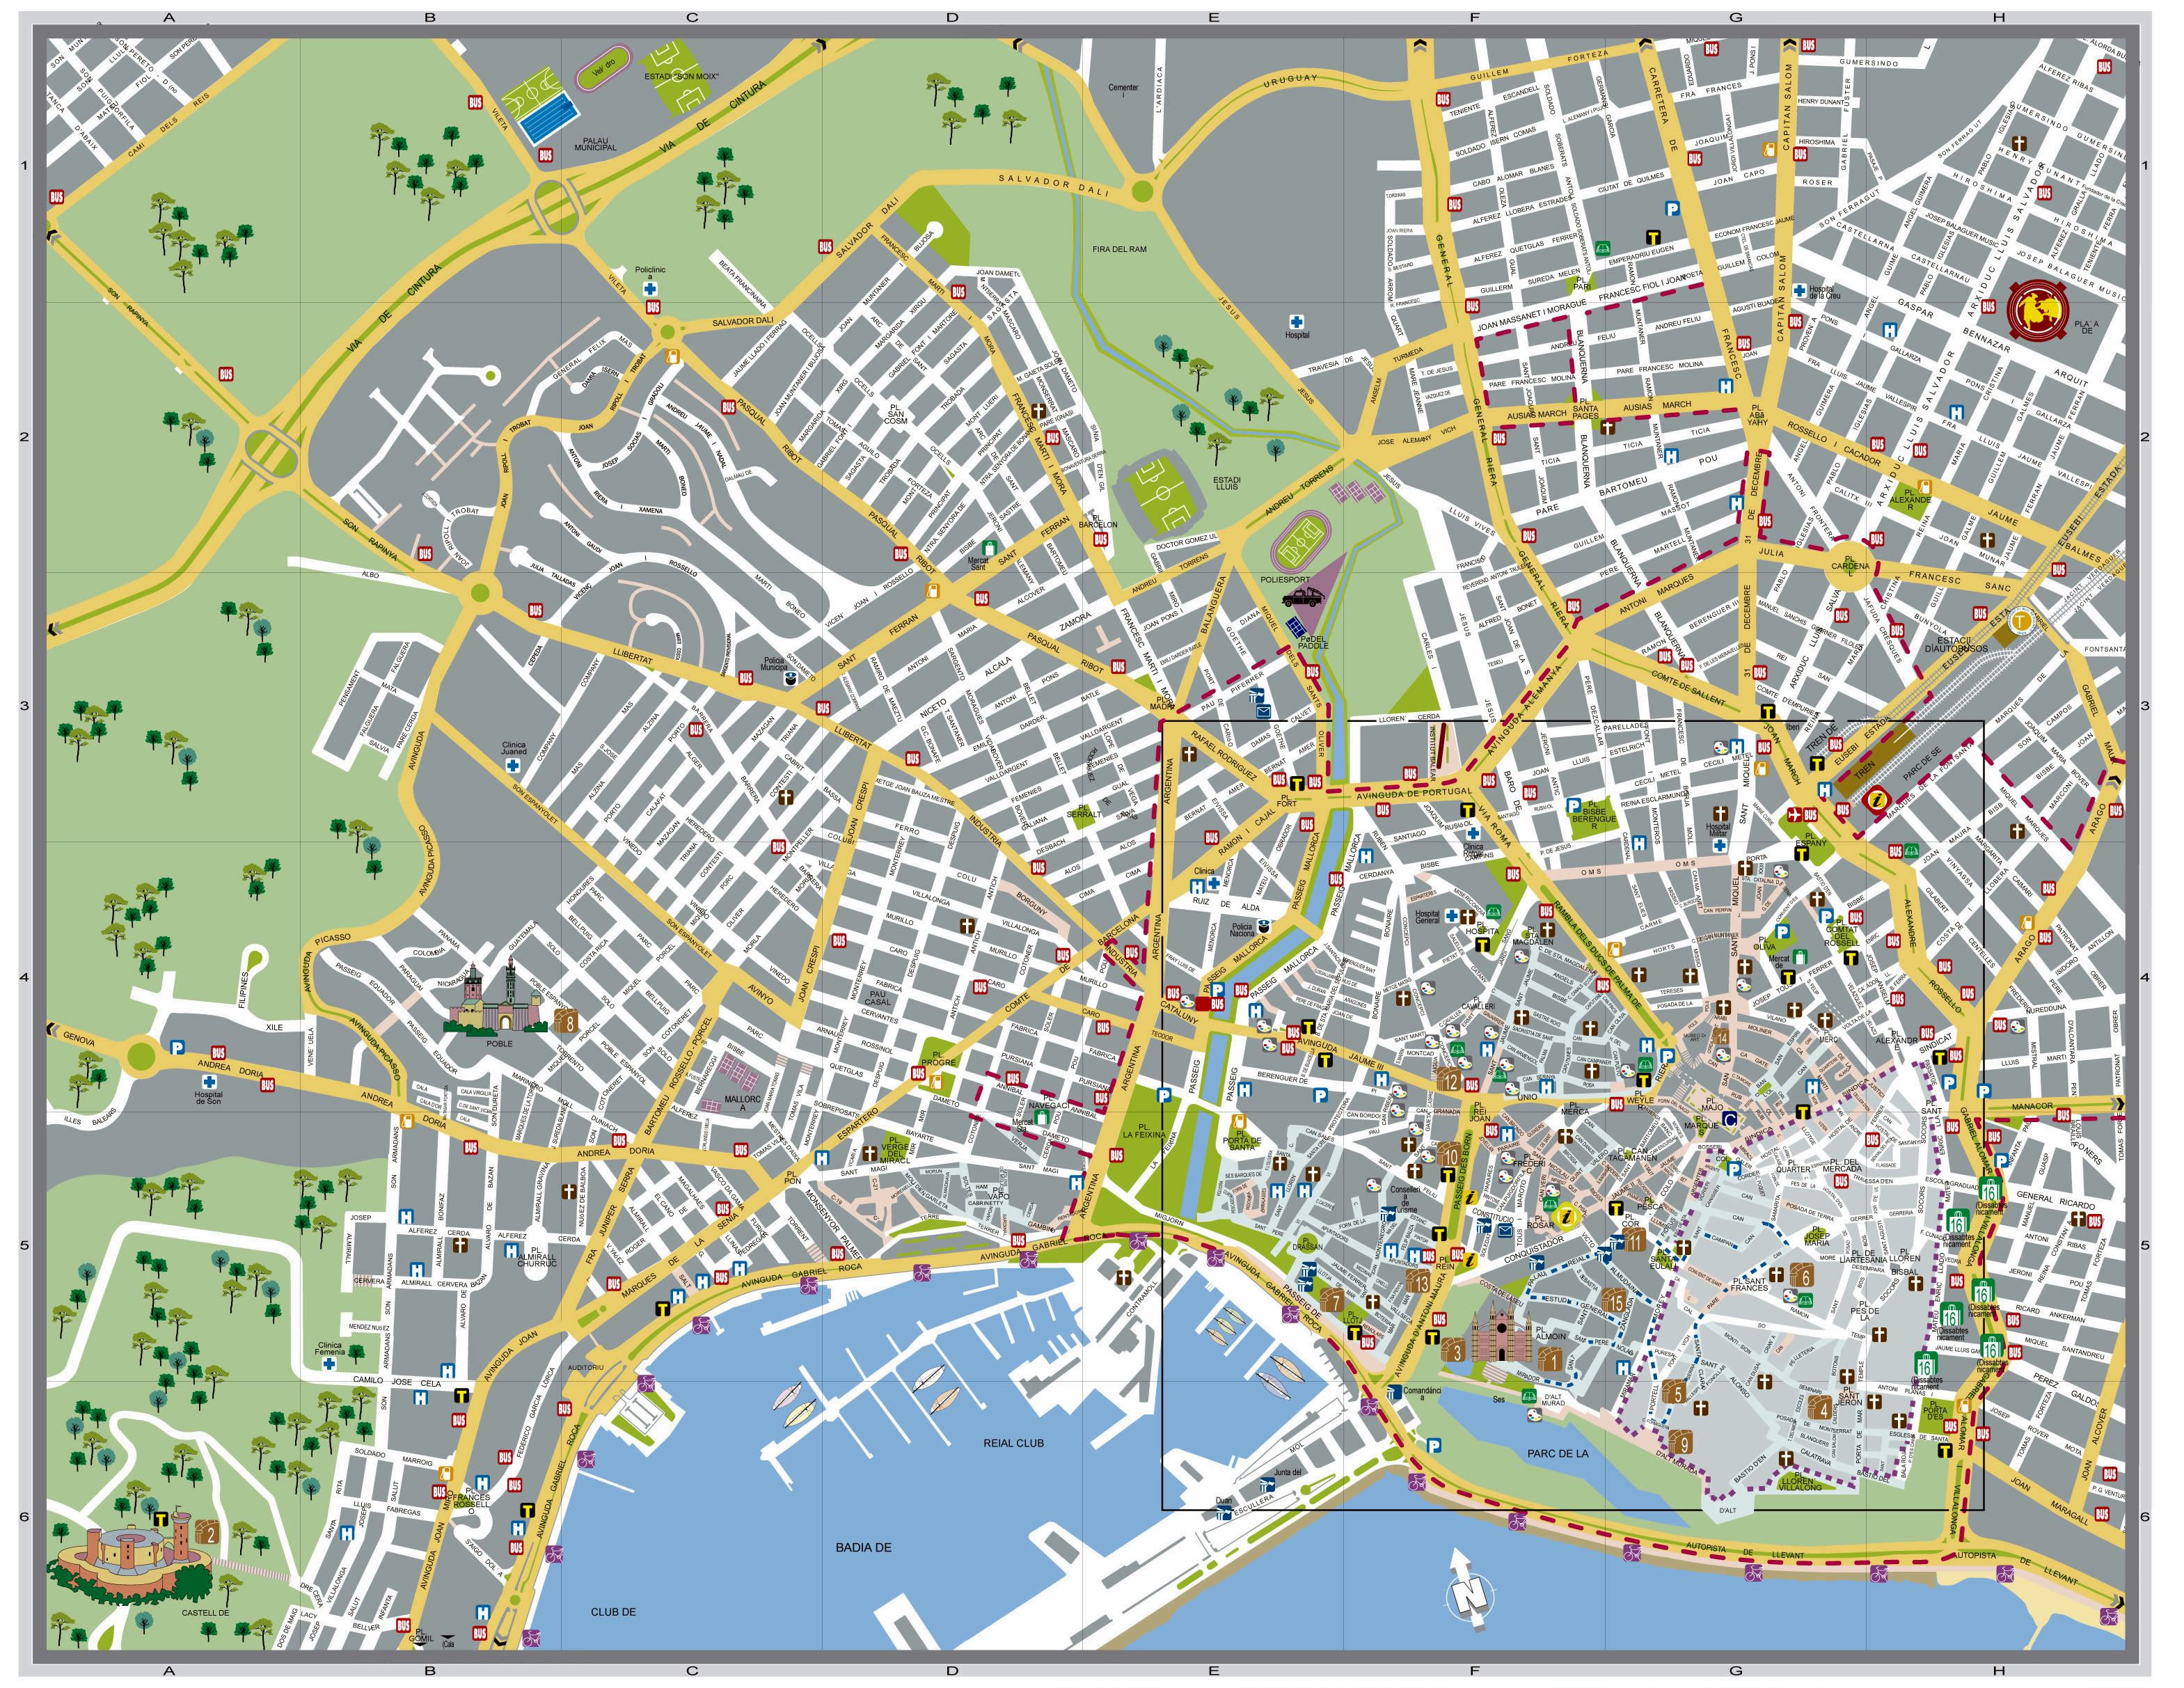 Large Palma de Mallorca Maps for Free Download and Print | High-Resolution and Detailed Maps